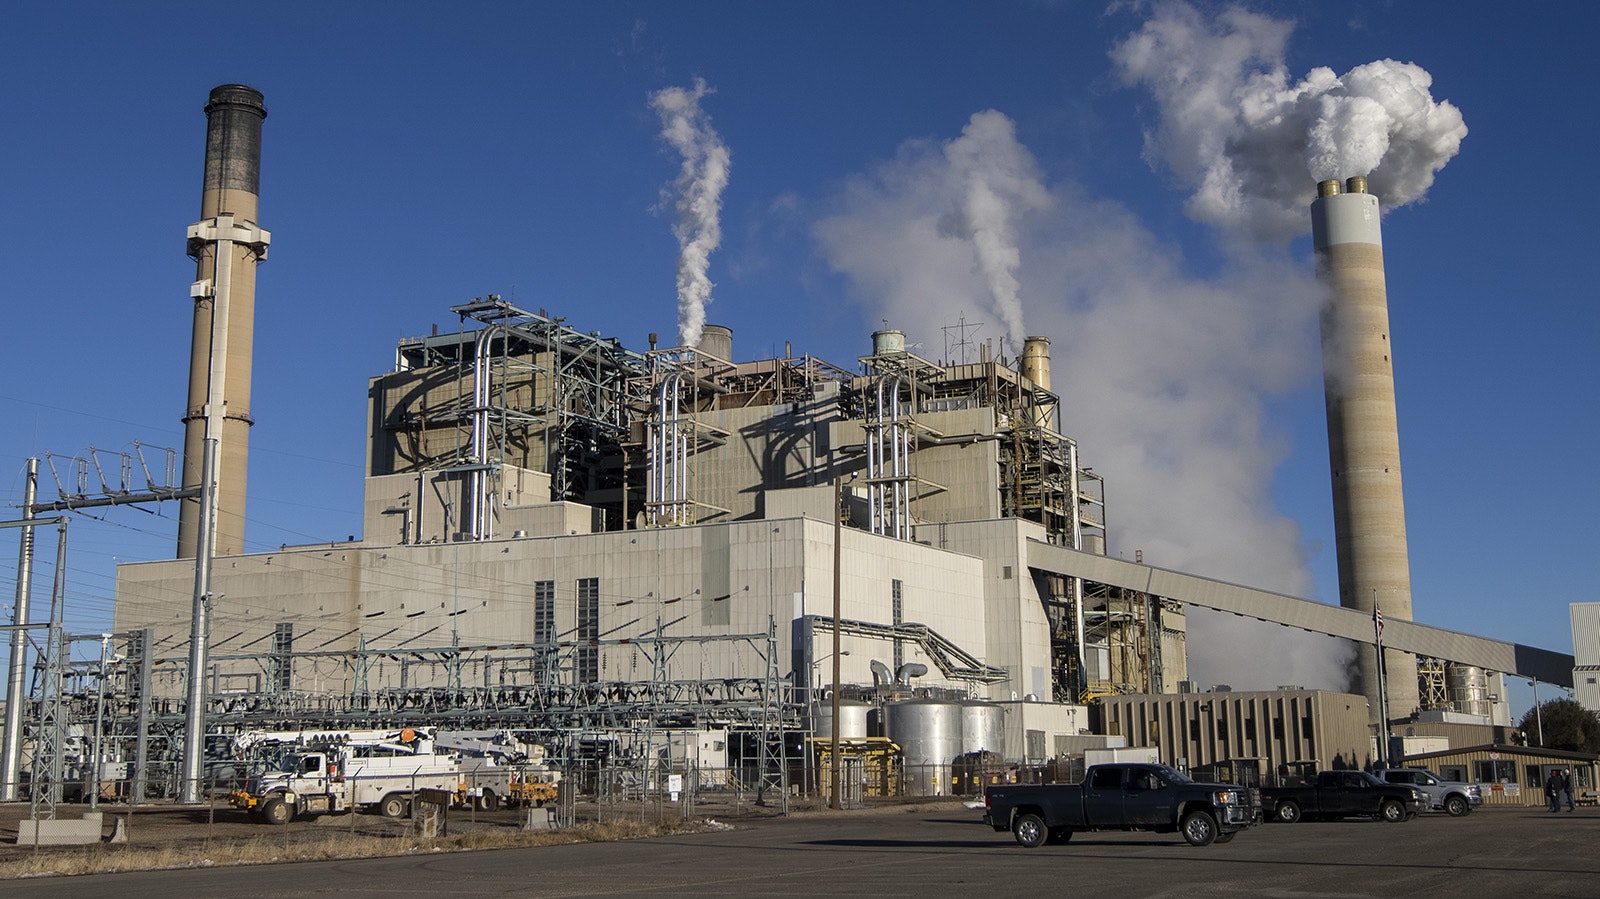 The Naughton power plant in Kemmerer, Wyoming, will be repurposed as a Natrium nuclear power plant by TerraPower.